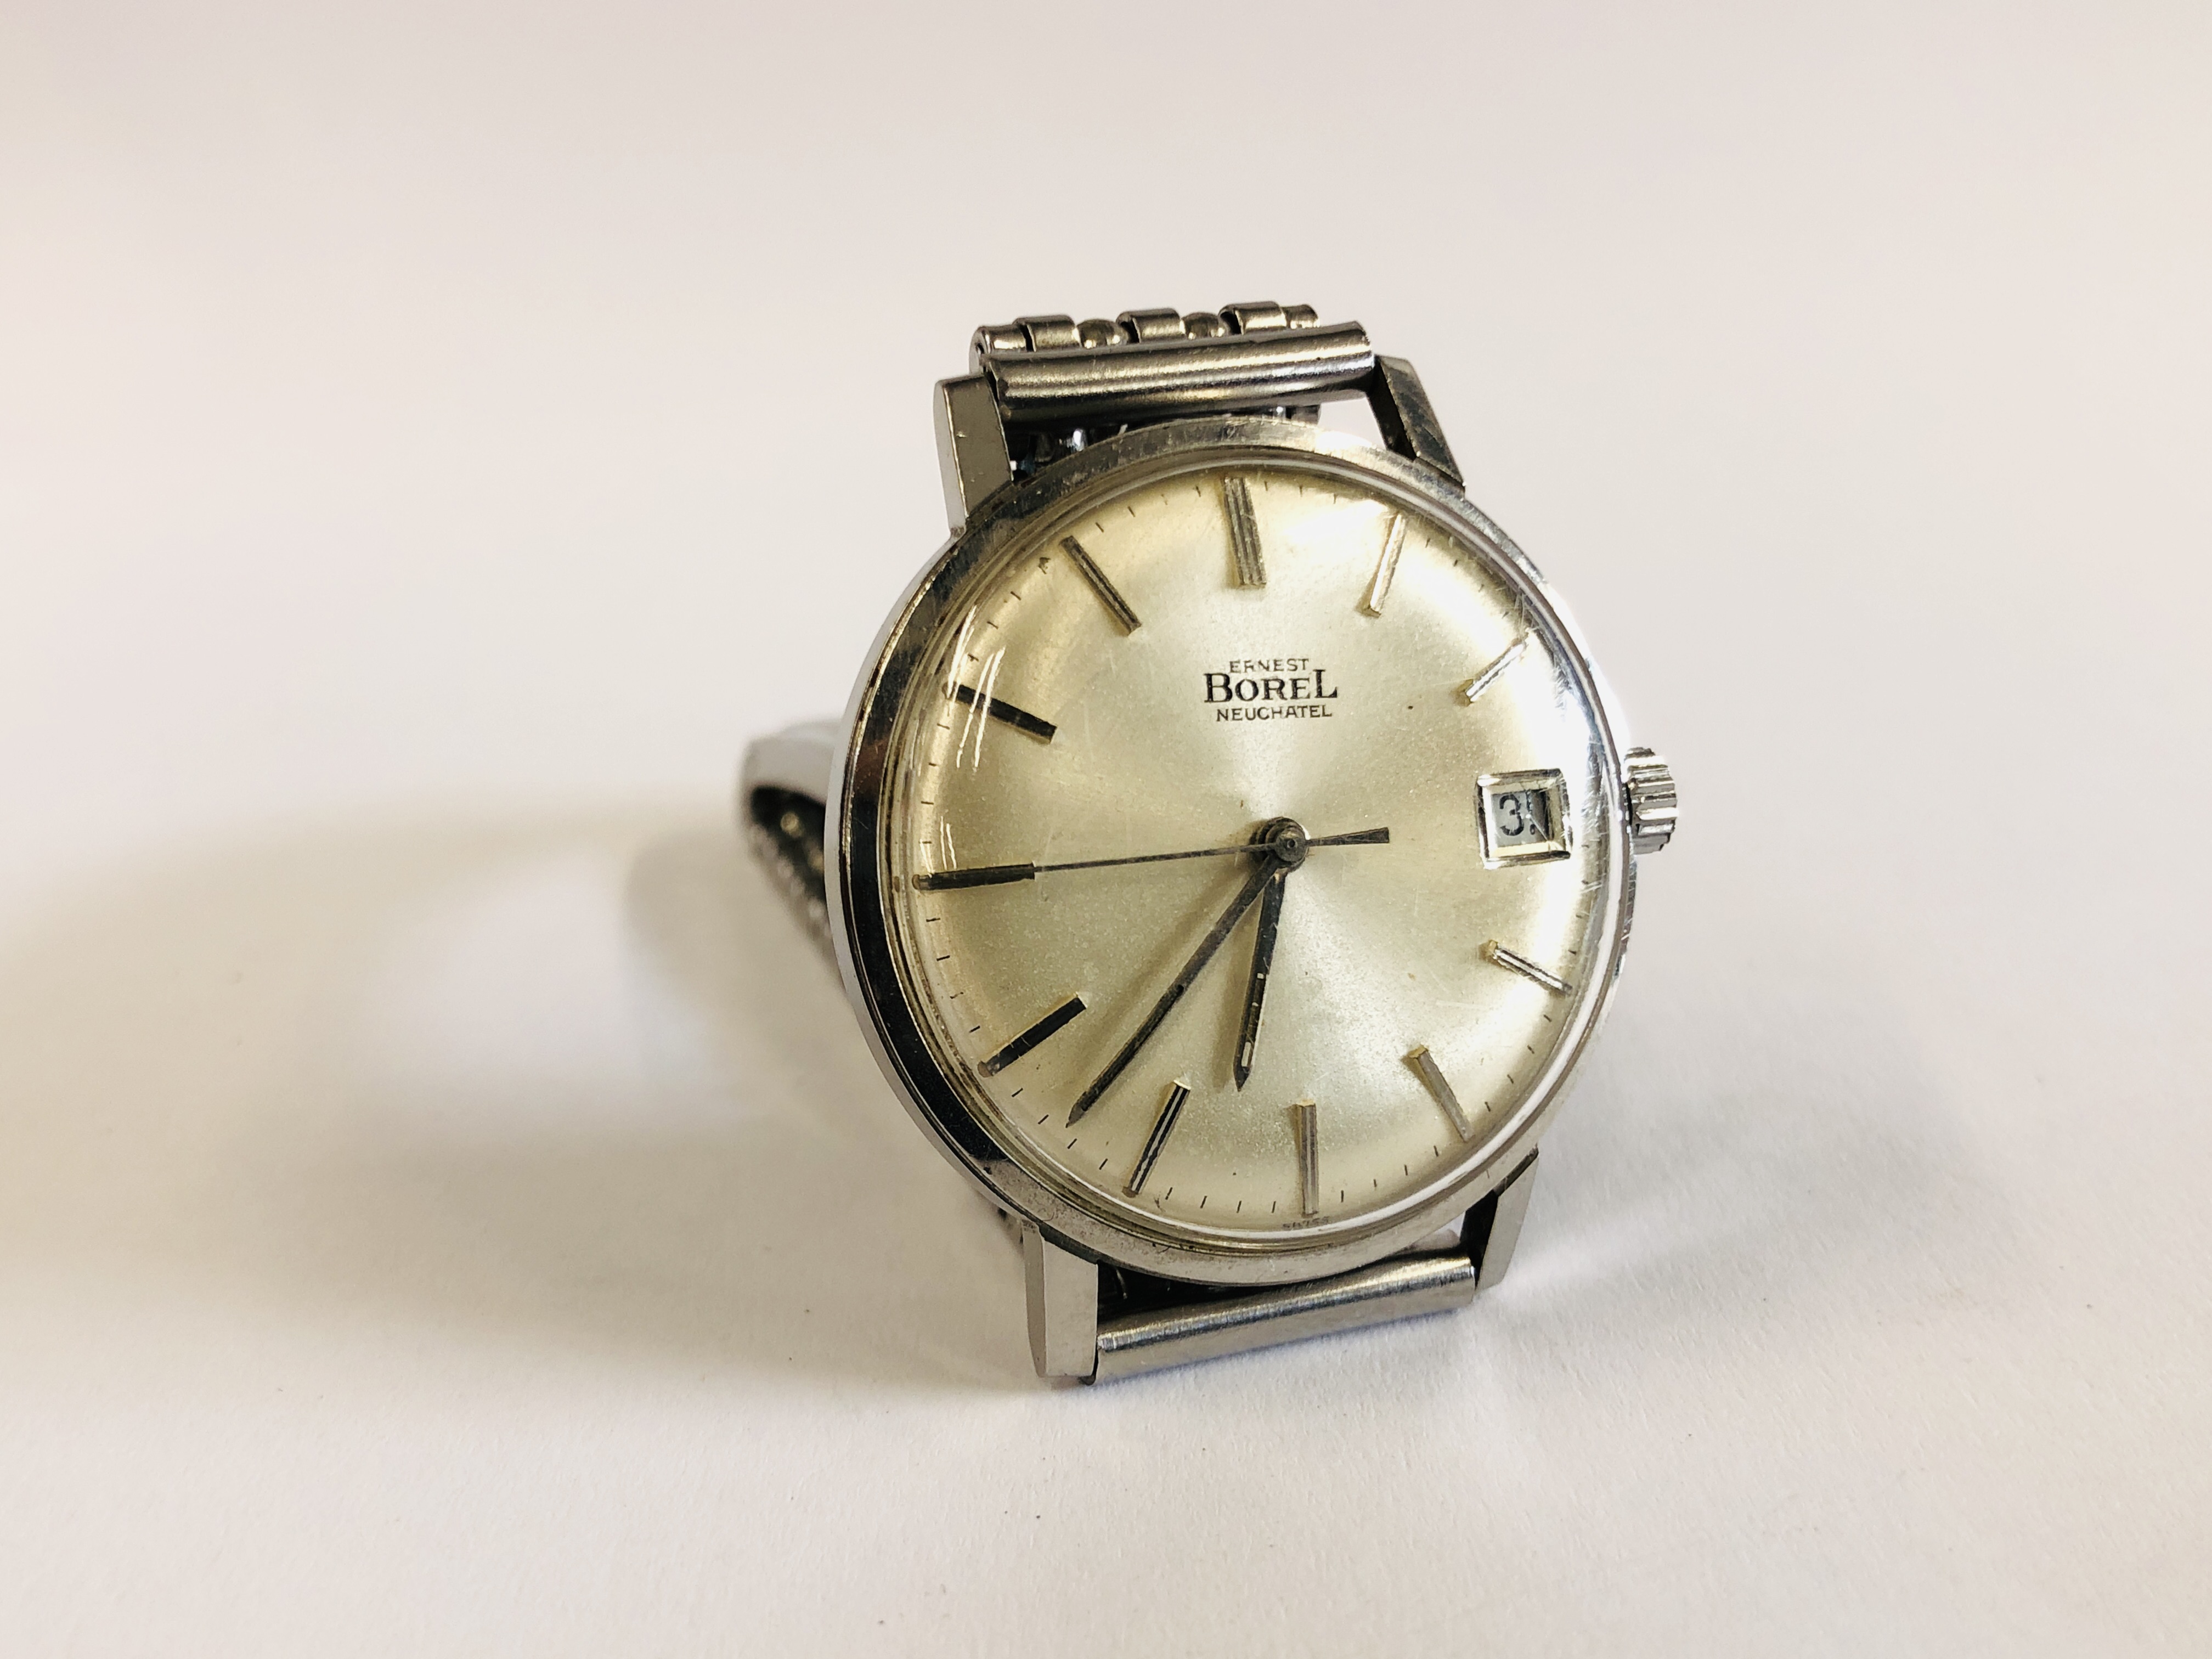 AN ORIGINAL 1960'S BOREL GENT'S WRIST WATCH AND BOX (WITH GUARANTEE AND SPARE WINDER).